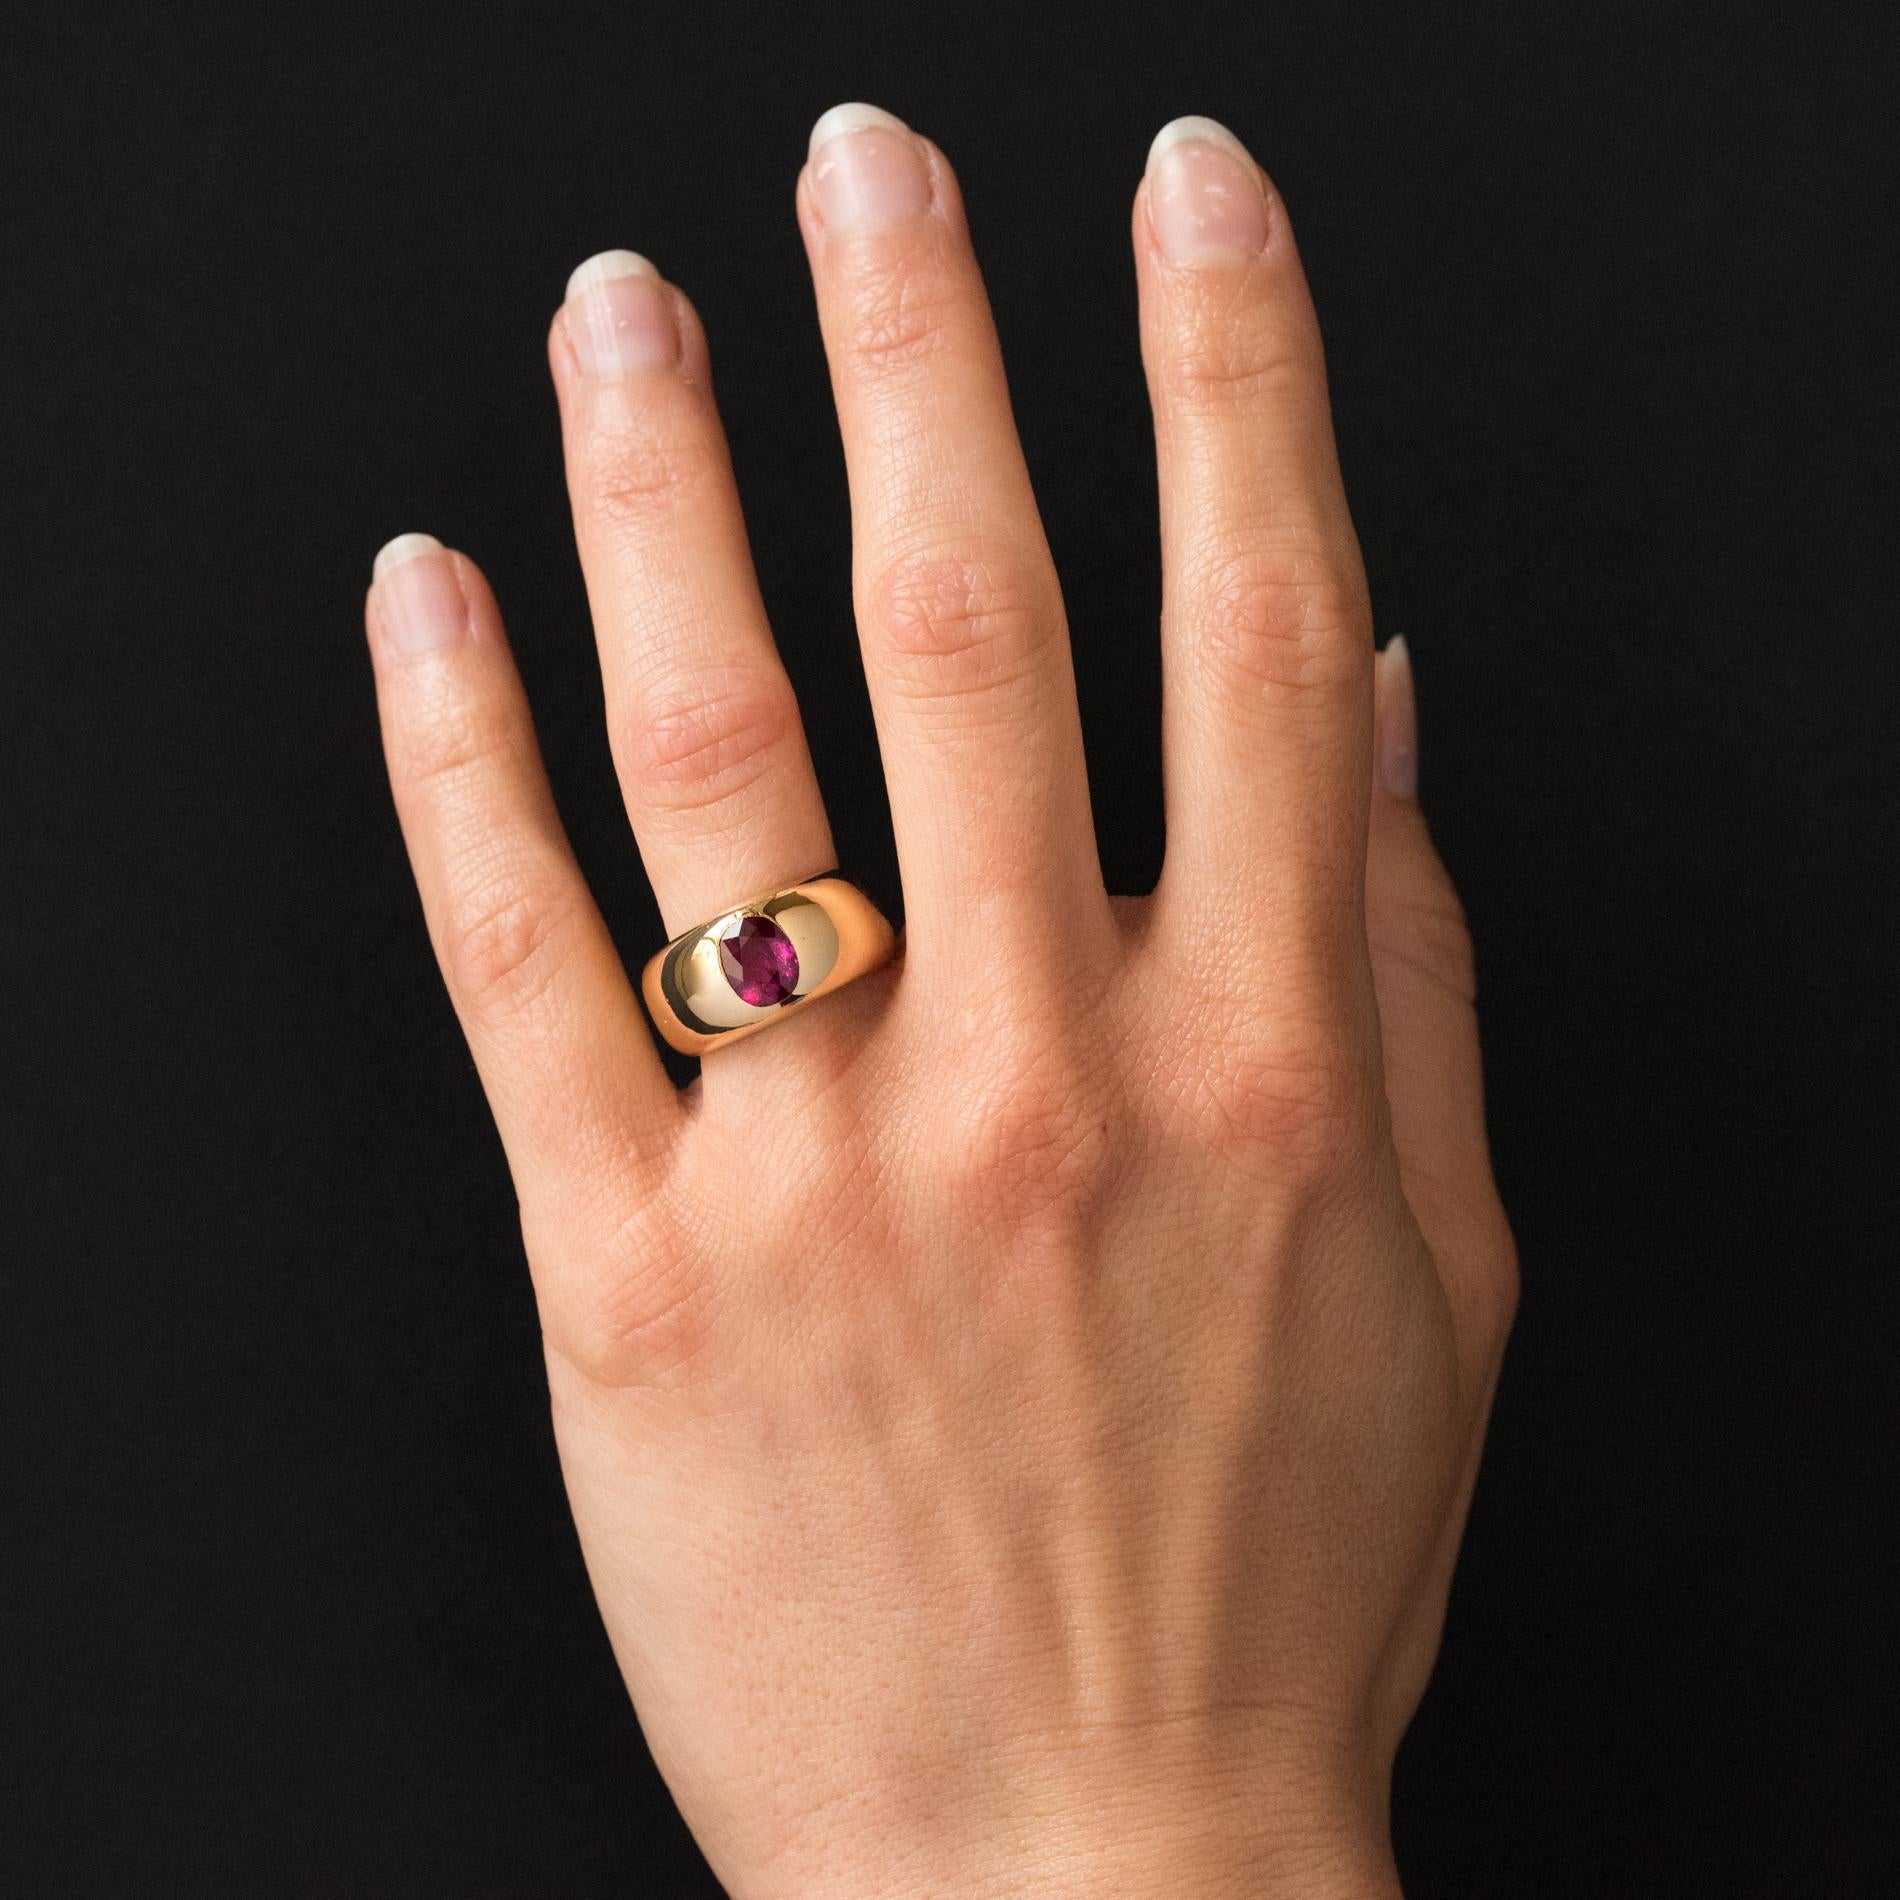 Ring in 18 karats yellow gold.
Beautiful bangle ring, it's closed set with a raspberry red color ruby, from the famous mines of Burma. The mount carries inside an engraving dating from July 3, 1911 which can be removed if necessary.
Total weight of